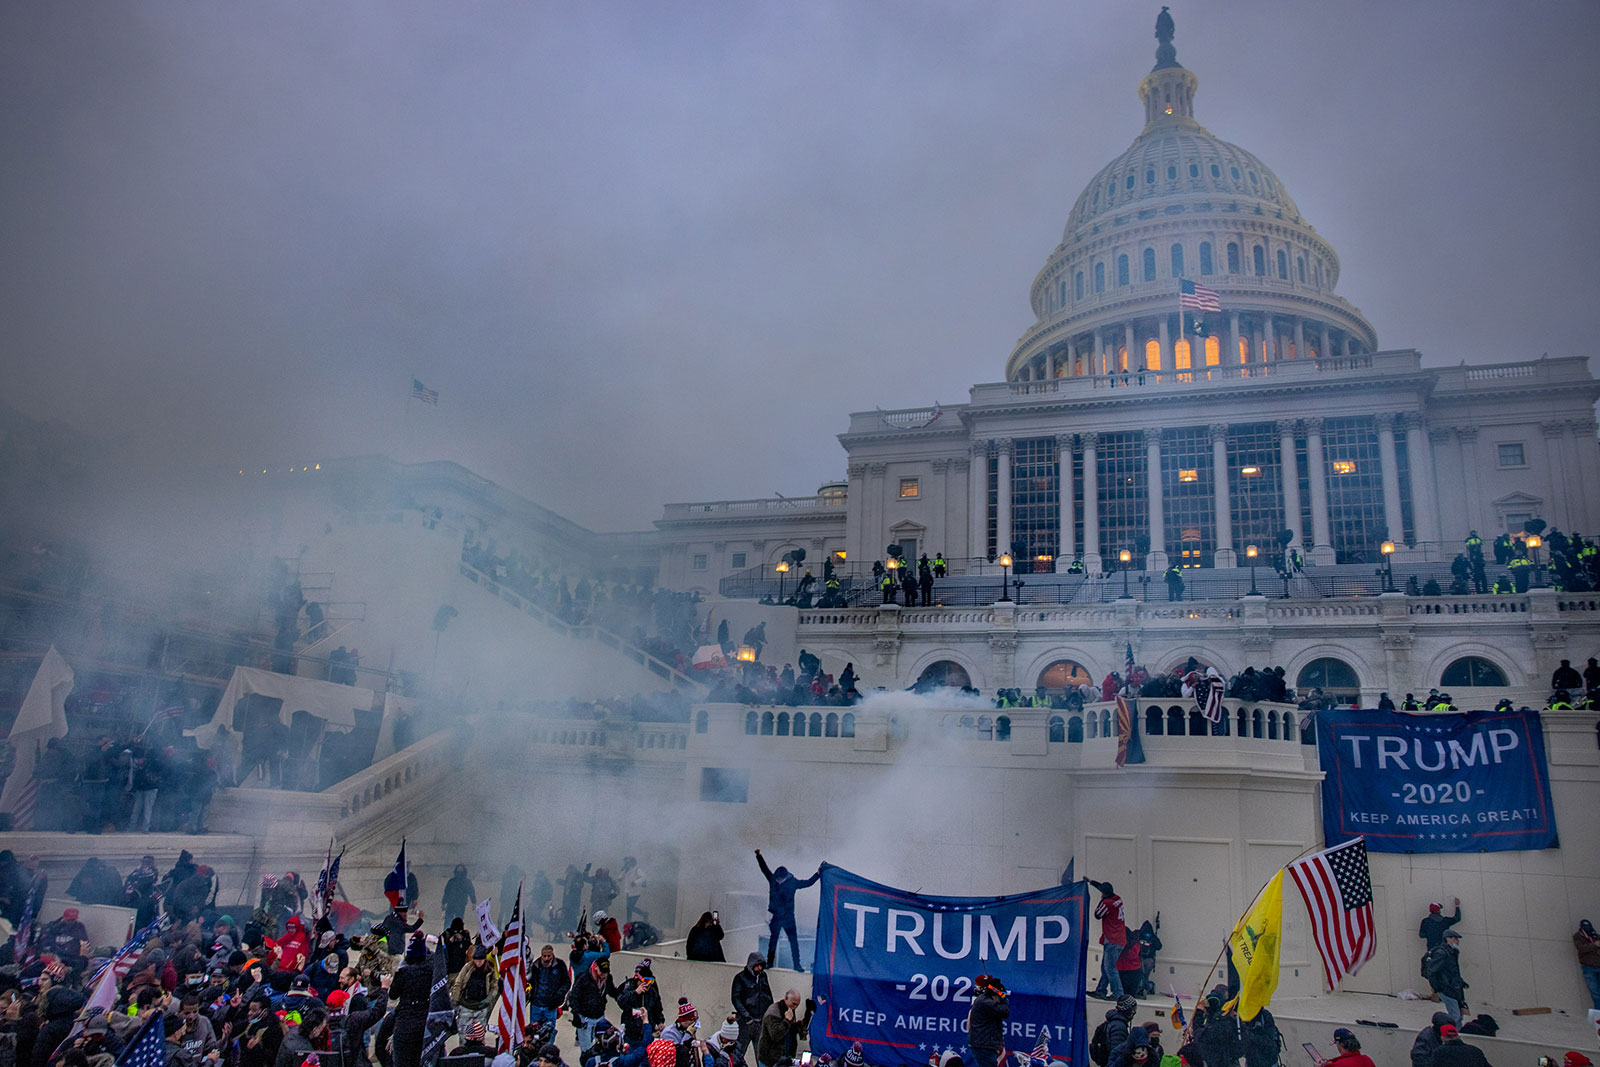 Tear gas is fired as supporters of former President Trump storm the US Capitol building on January 6, 2021. 